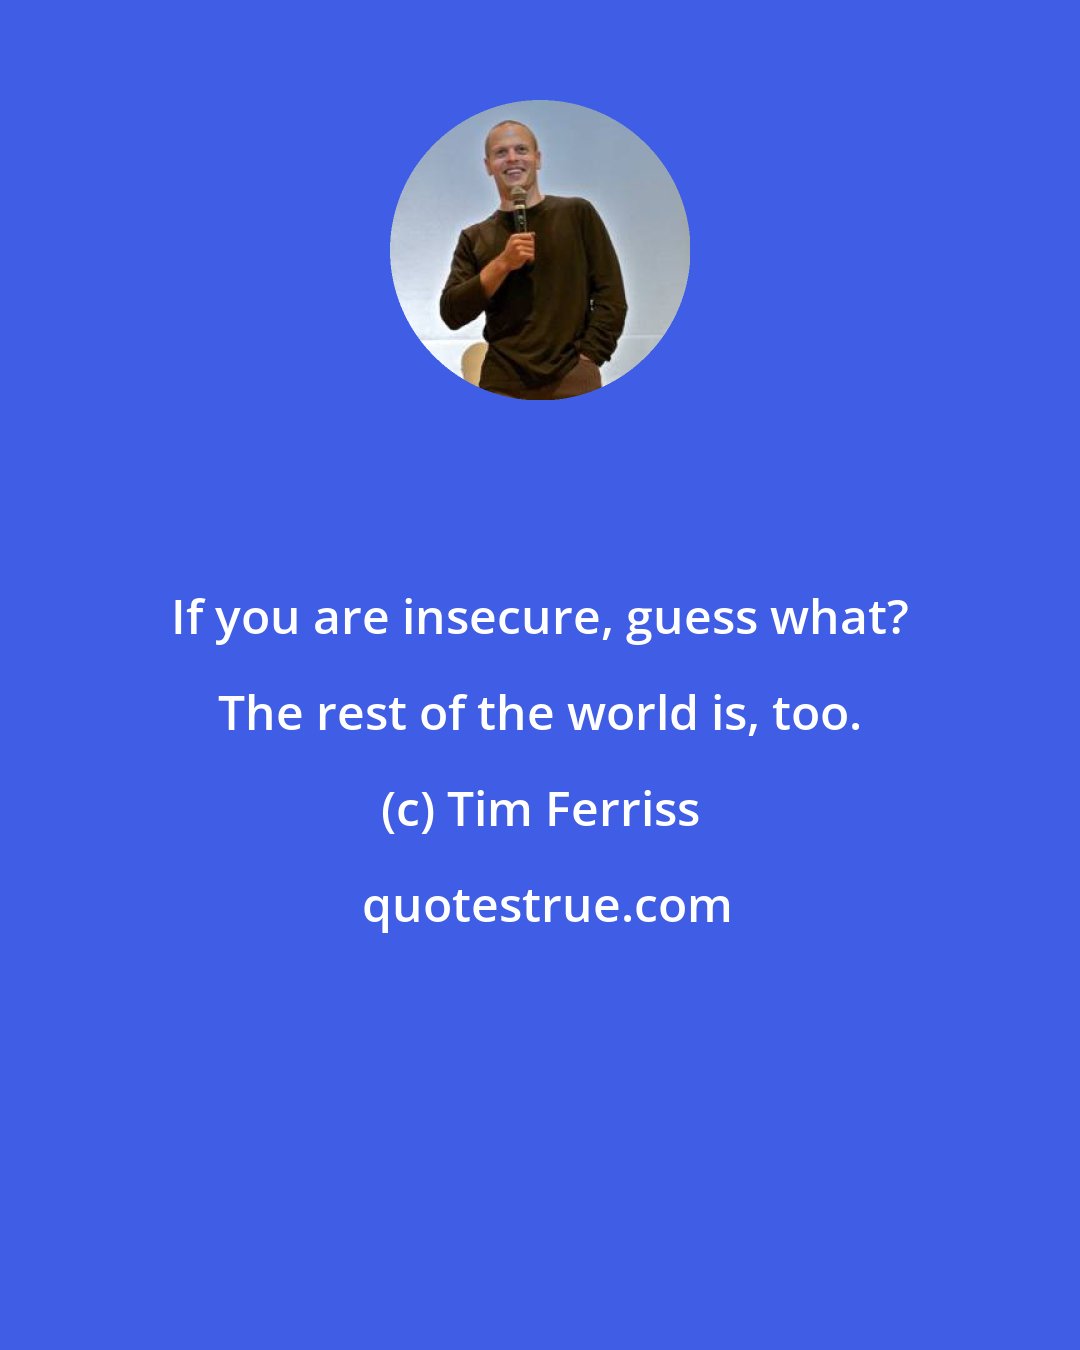 Tim Ferriss: If you are insecure, guess what? The rest of the world is, too.